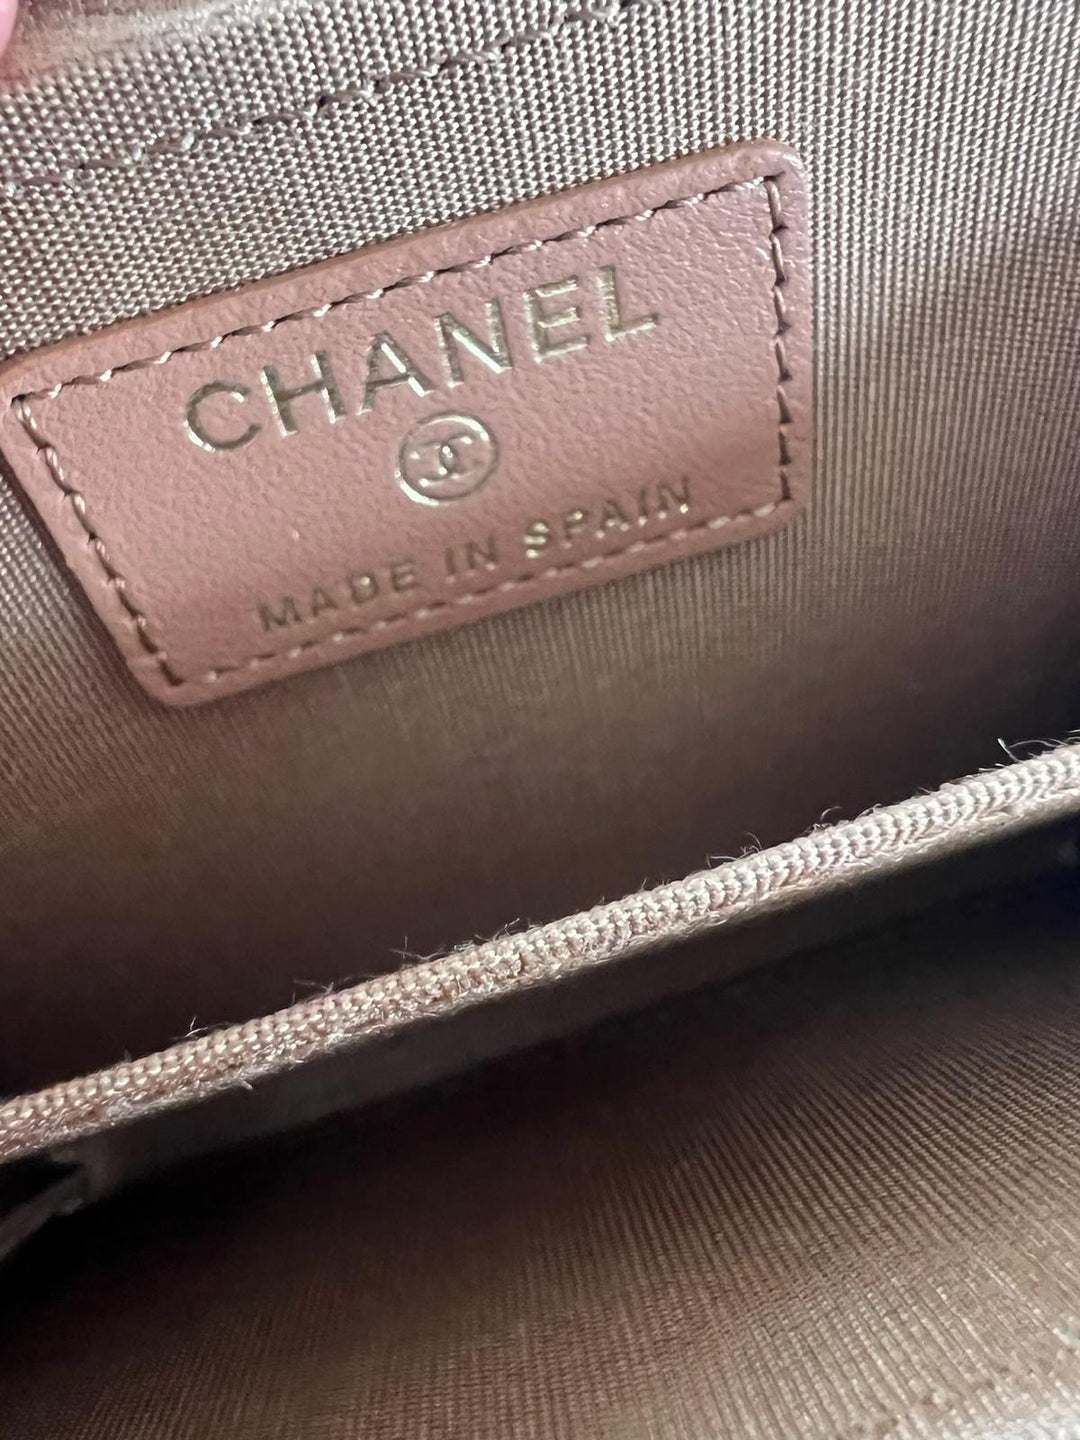 Chanel 19 Zipped Coin Purse in Lambskin Caramel Leather